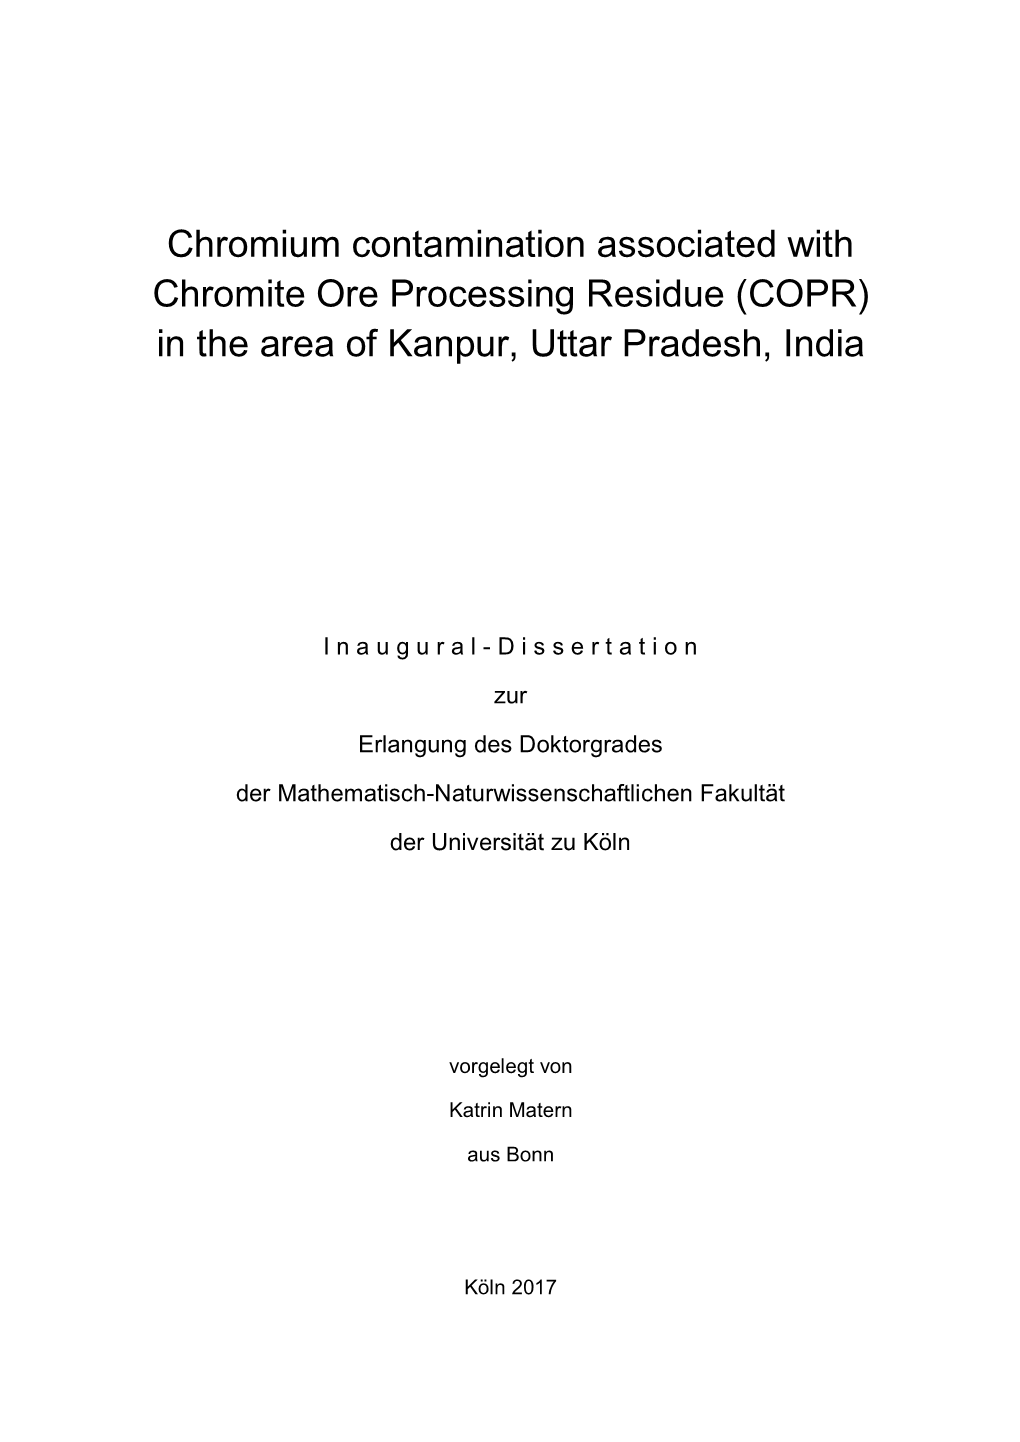 Chromium Contamination Associated with Chromite Ore Processing Residue (COPR) in the Area of Kanpur, Uttar Pradesh, India